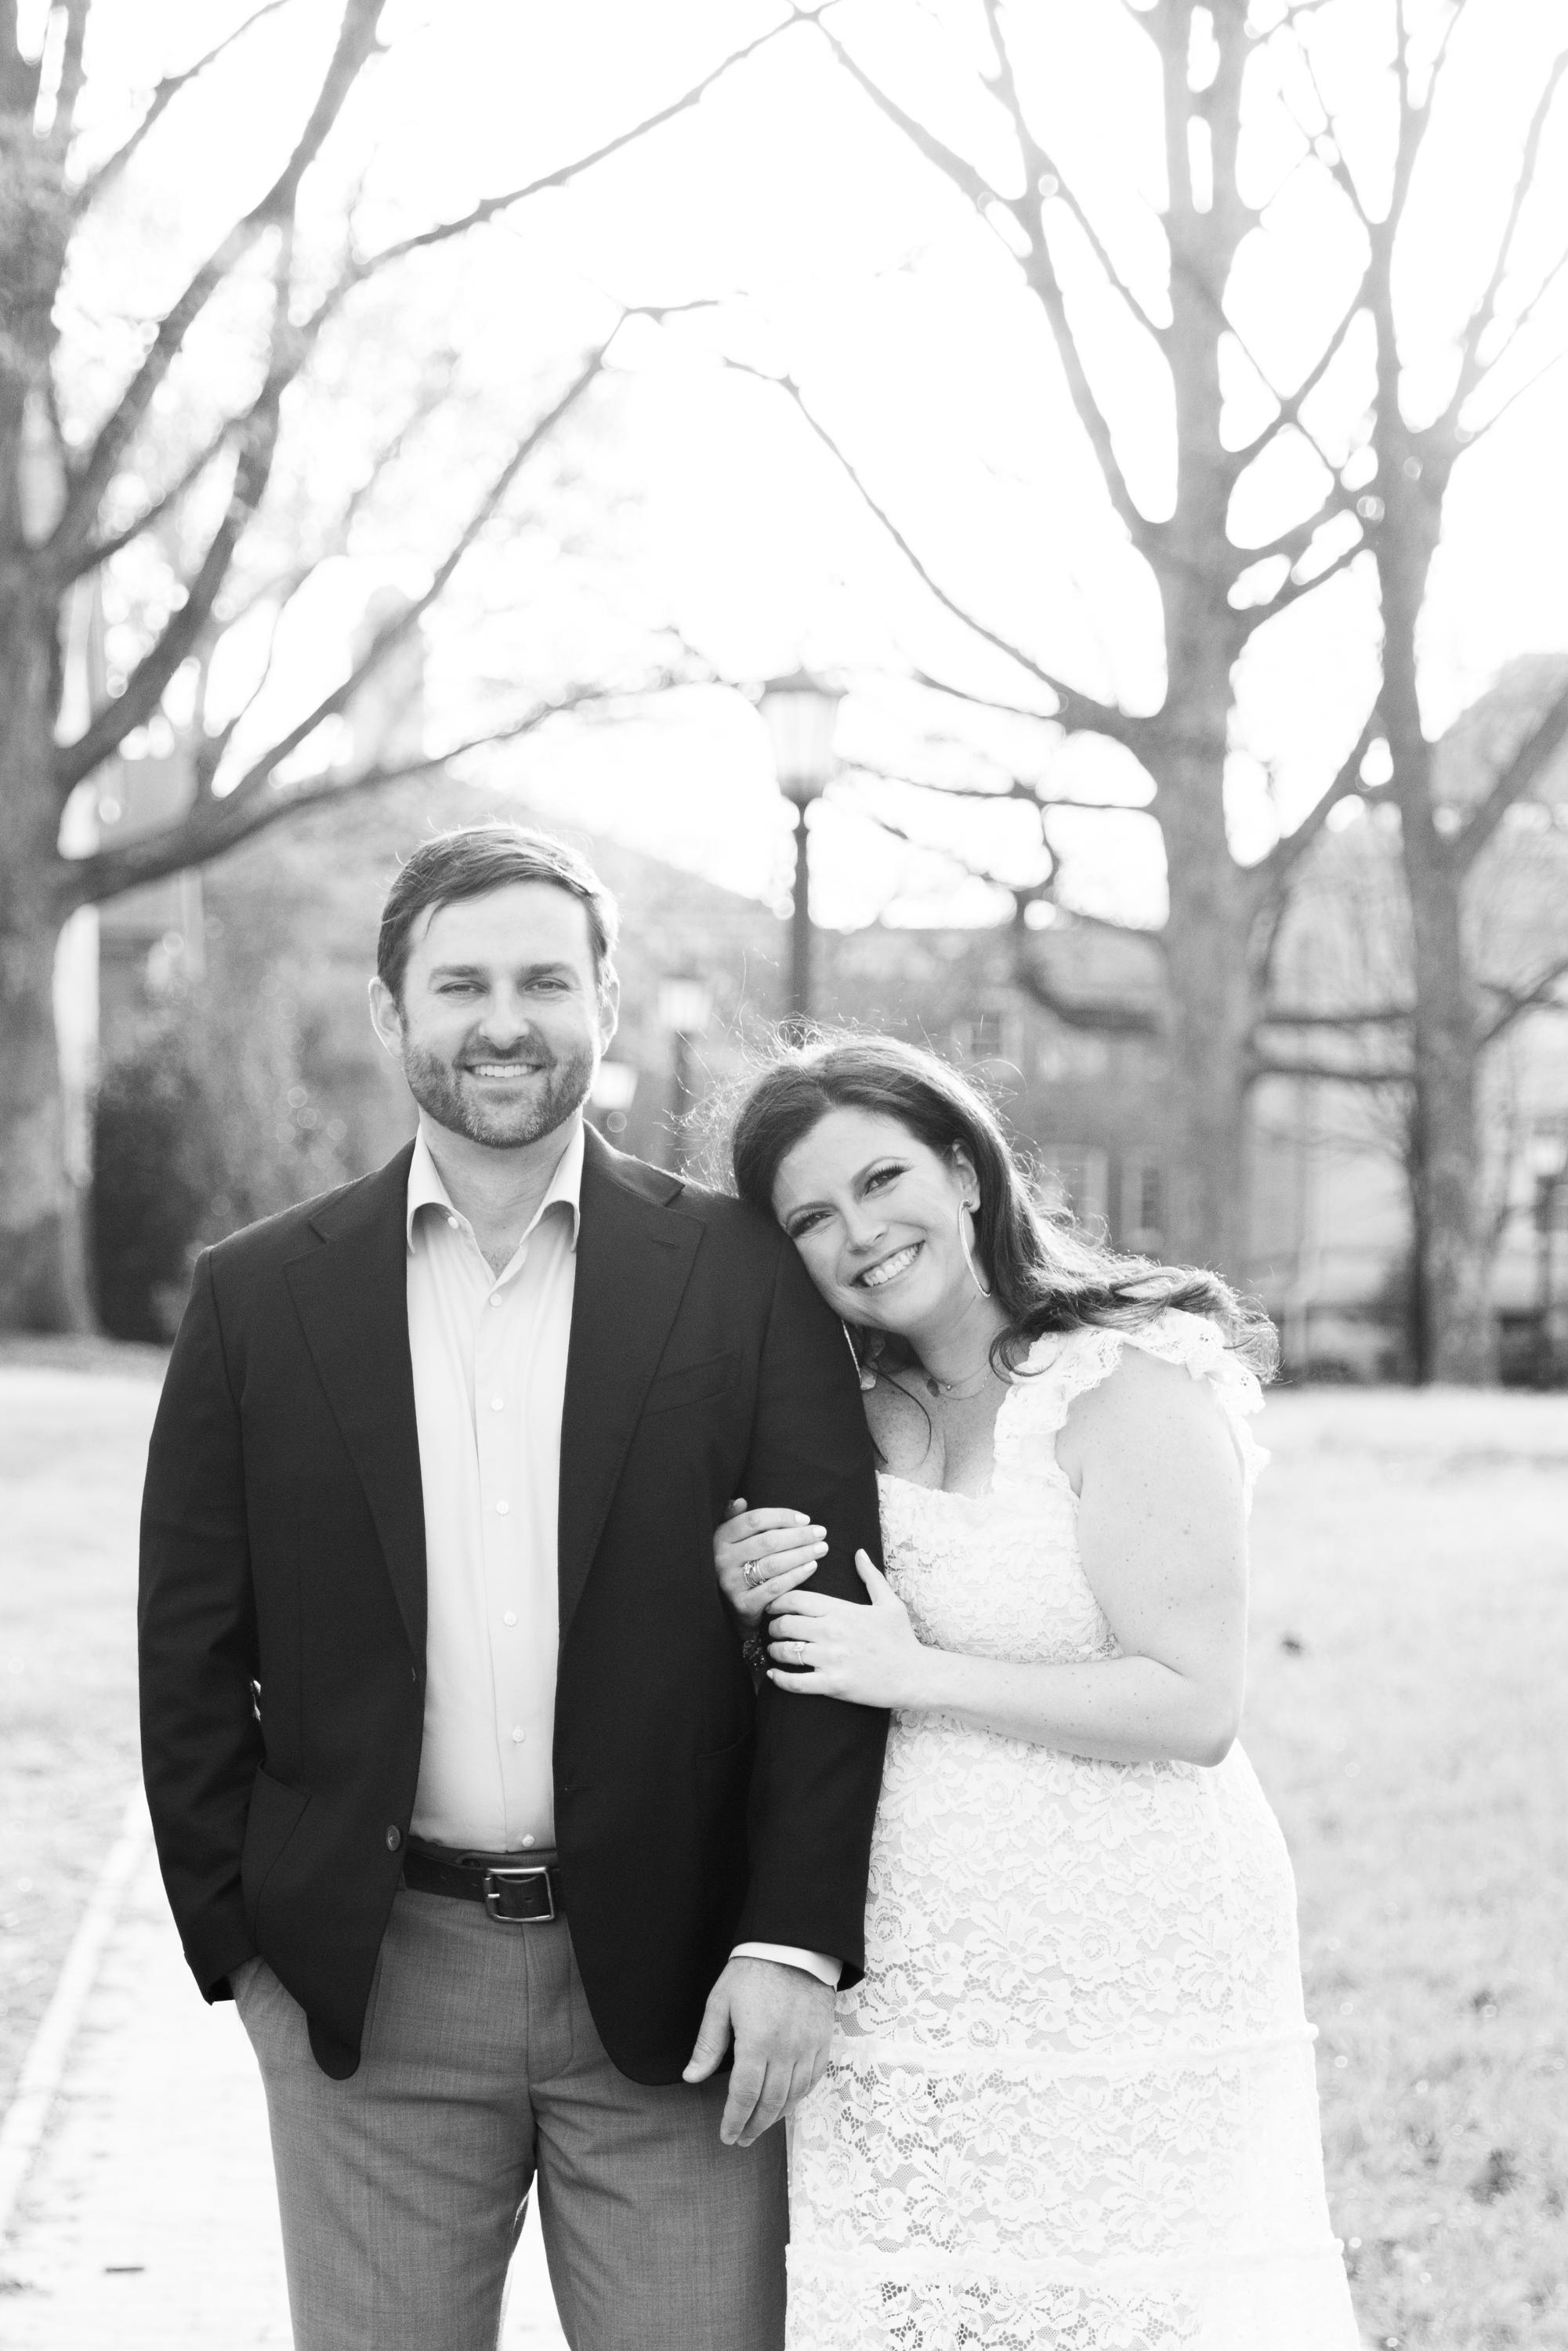 The Wedding Website of Bryce Yeargan and Betsy Fox